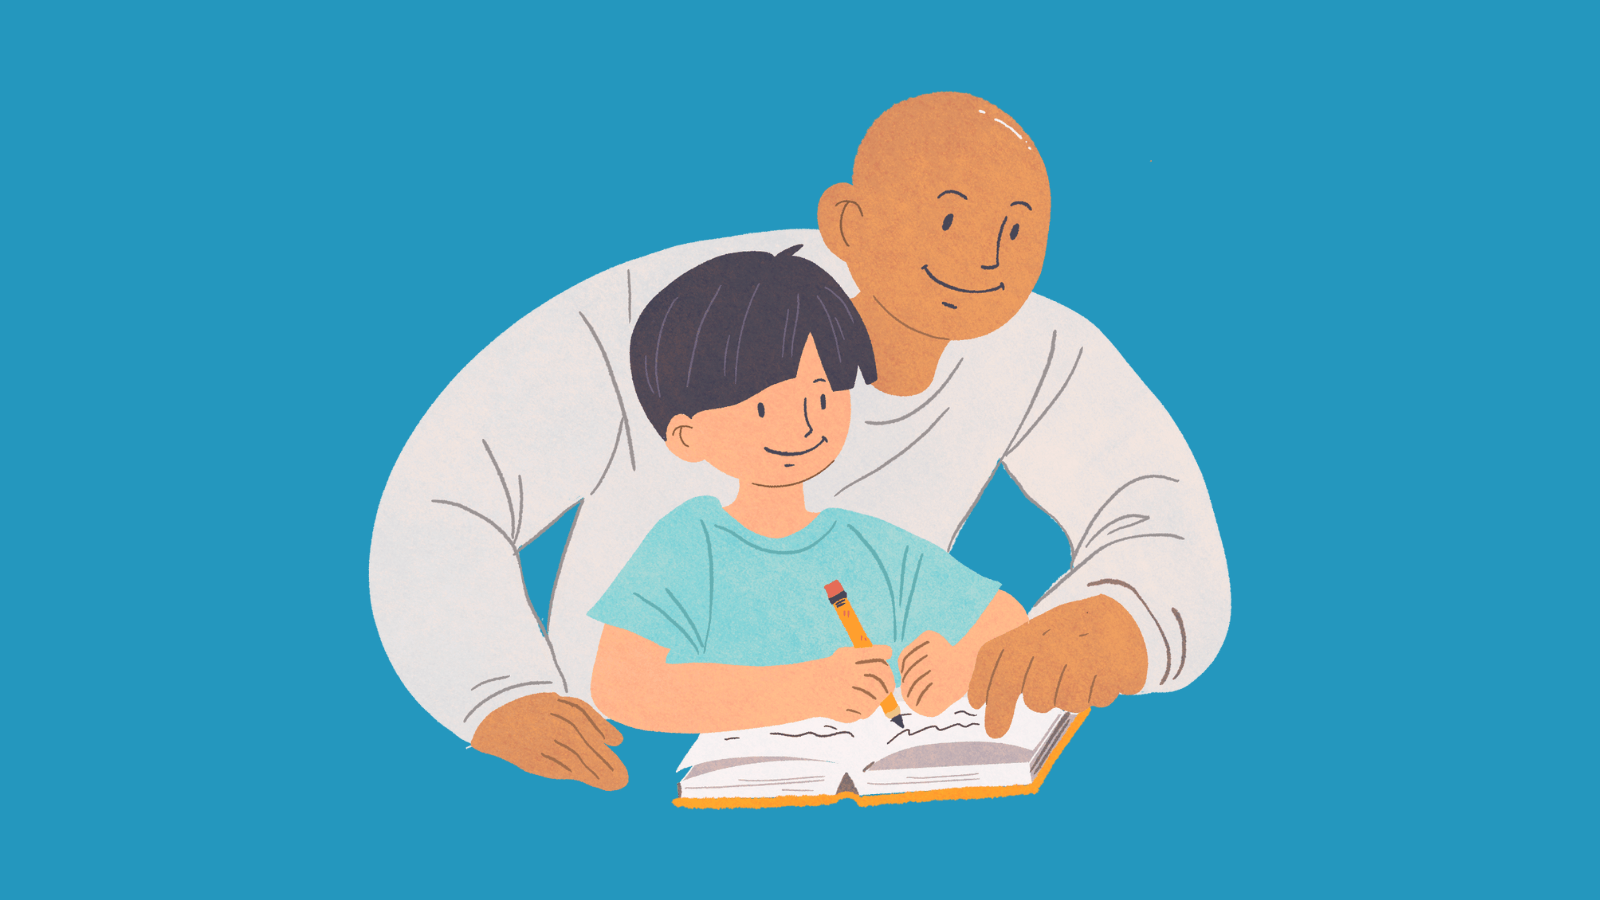 An adult helping a child with schoolwork